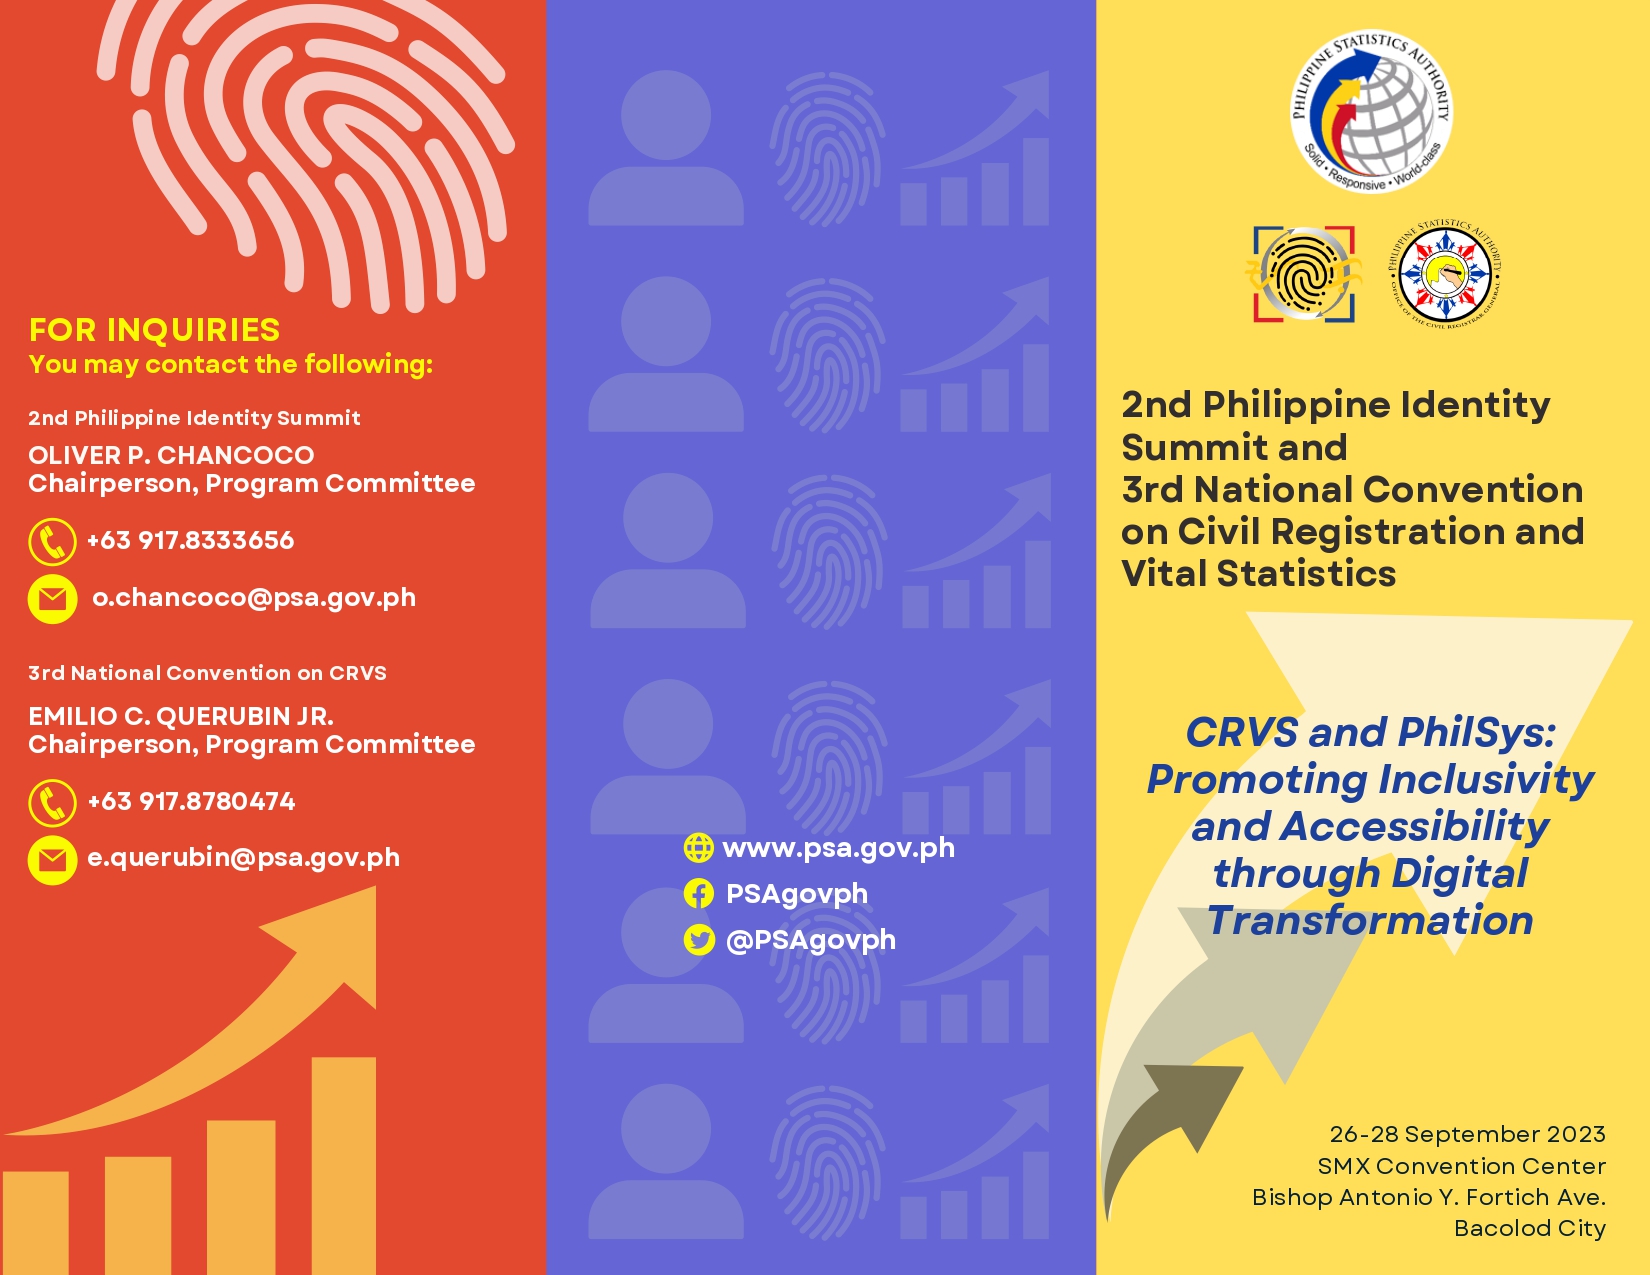 2nd-Philippine-identity-Summit-and-3rd-NCCRVS (1)_page-0001